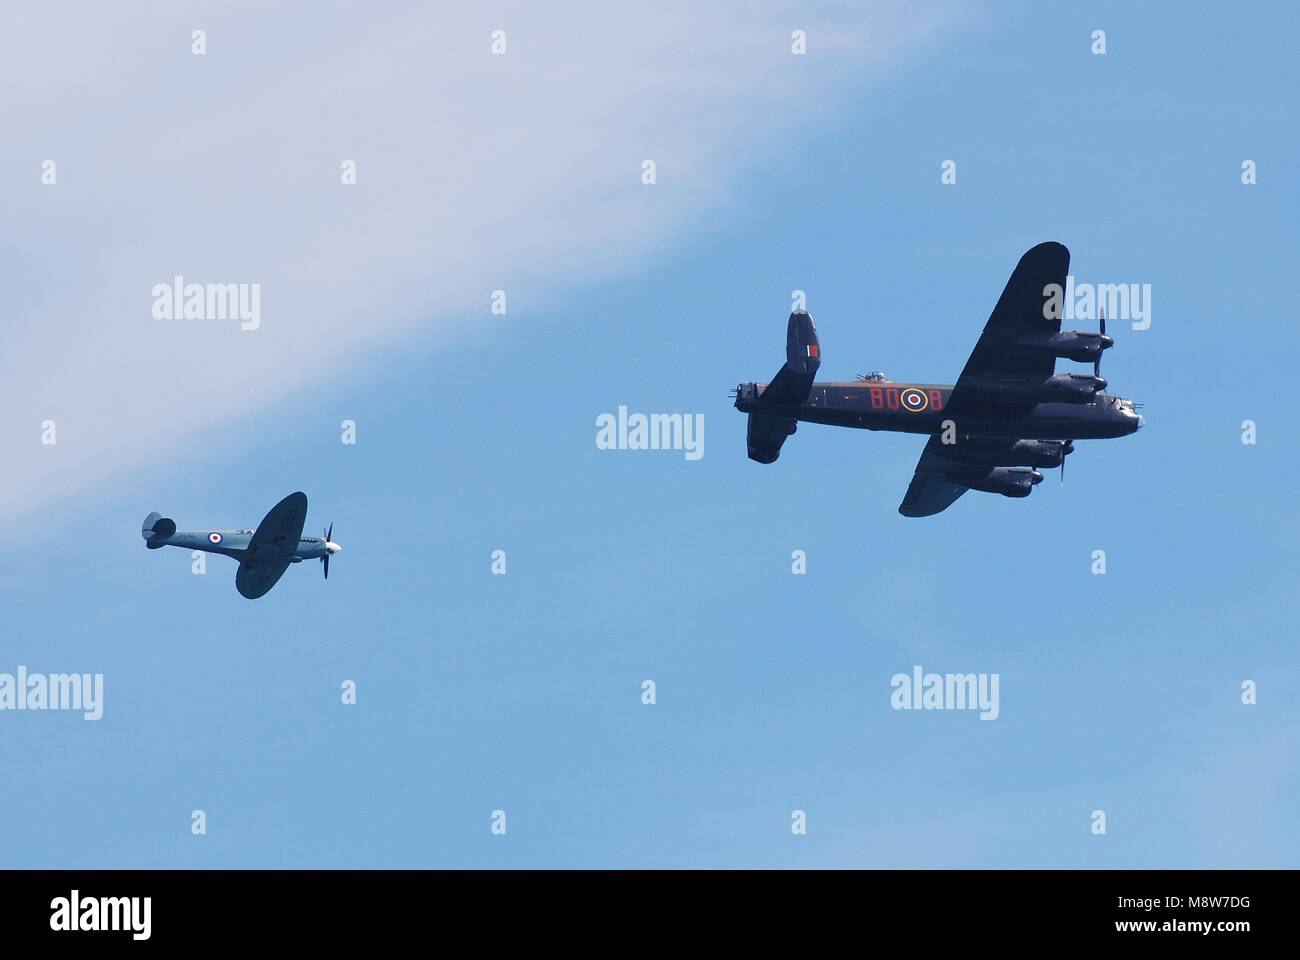 Avro Lancaster PA474 of the Battle of Britain Memorial Flight and Spitfire escort perform at the Airbourne airshow at Eastbourne on August 11, 2012. Stock Photo